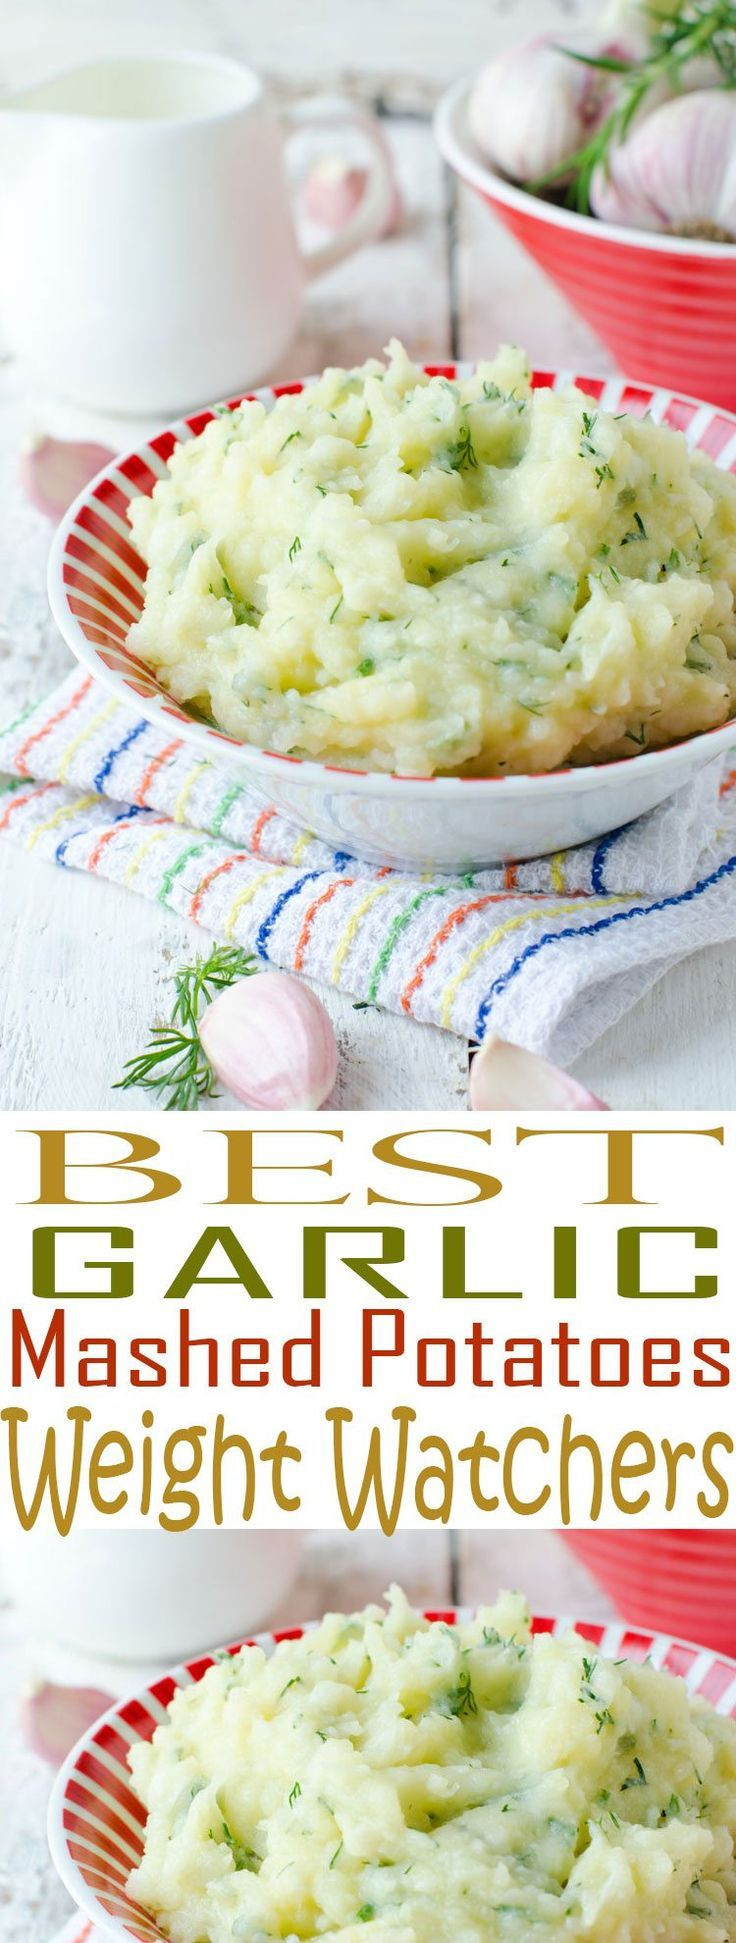 Is Mashed Potatoes Good For Weight Loss
 Garlic Mashed Potatoes – Weight Watchers Friendly